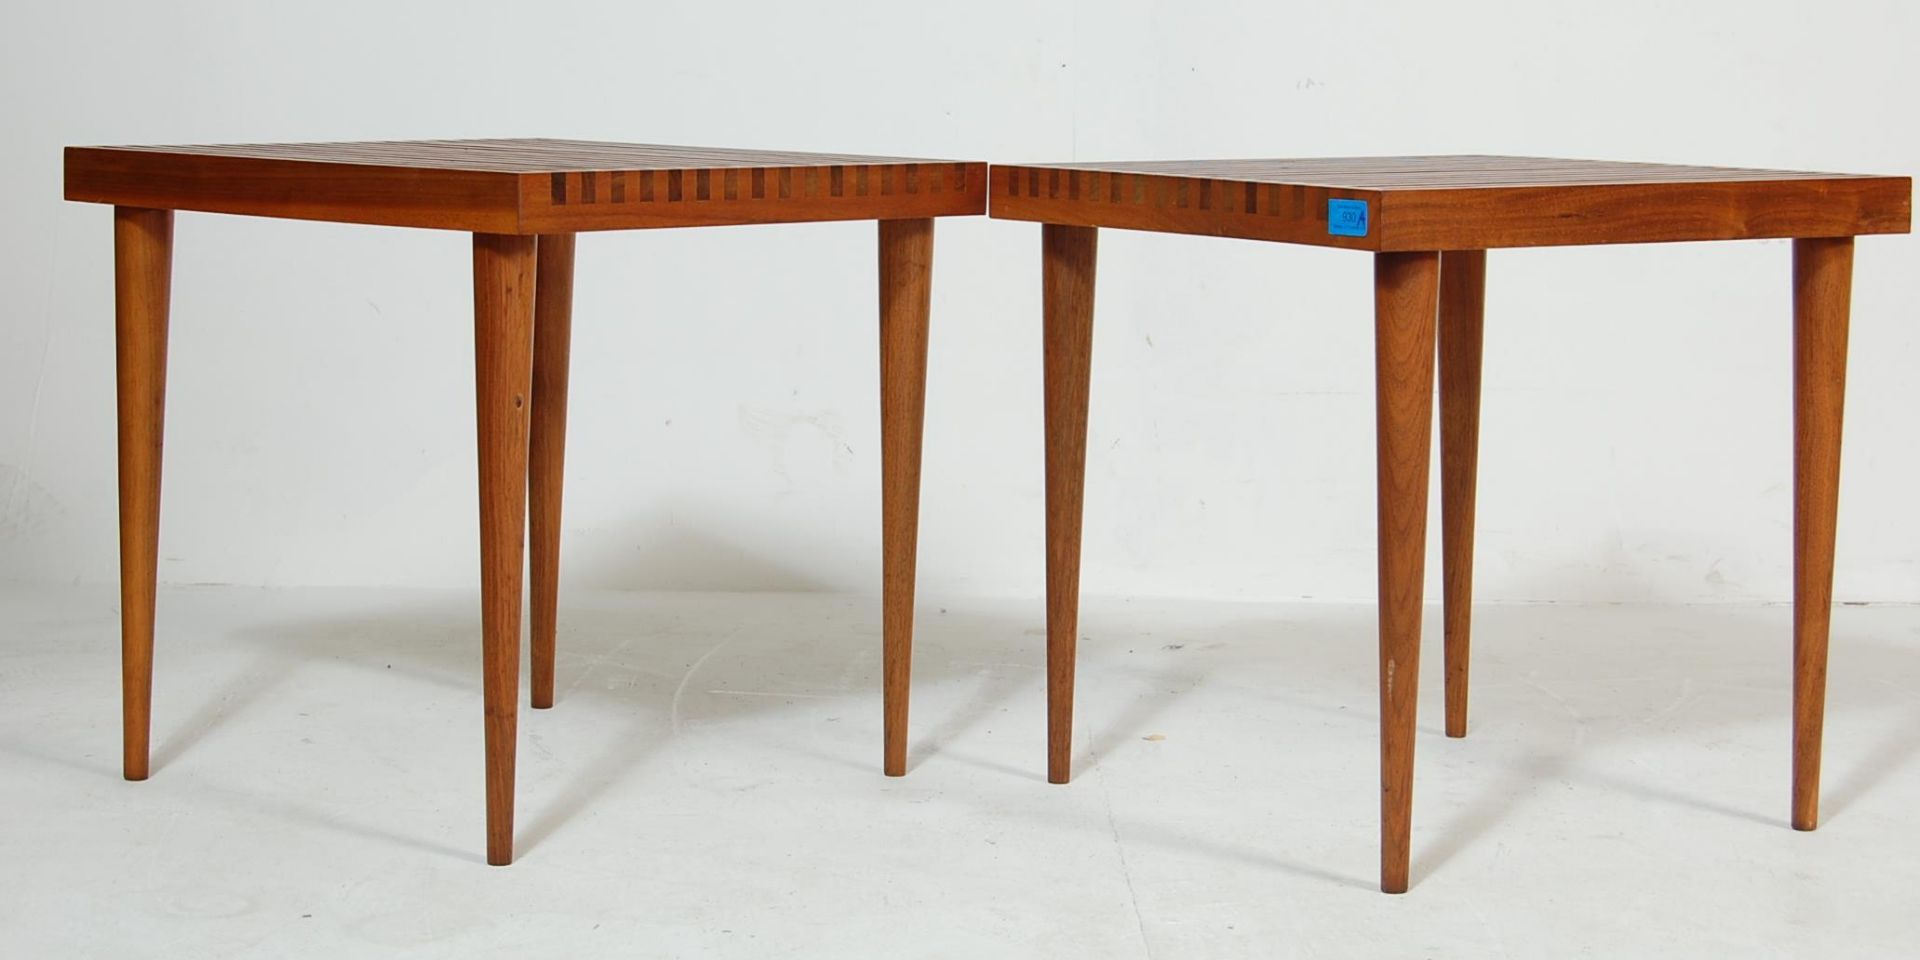 A PAIR OF VINTAGE RETRO 20TH CENTURY TEAK WOOD SLATTED TOPS COFFEE TABLES / SIDE TABLES